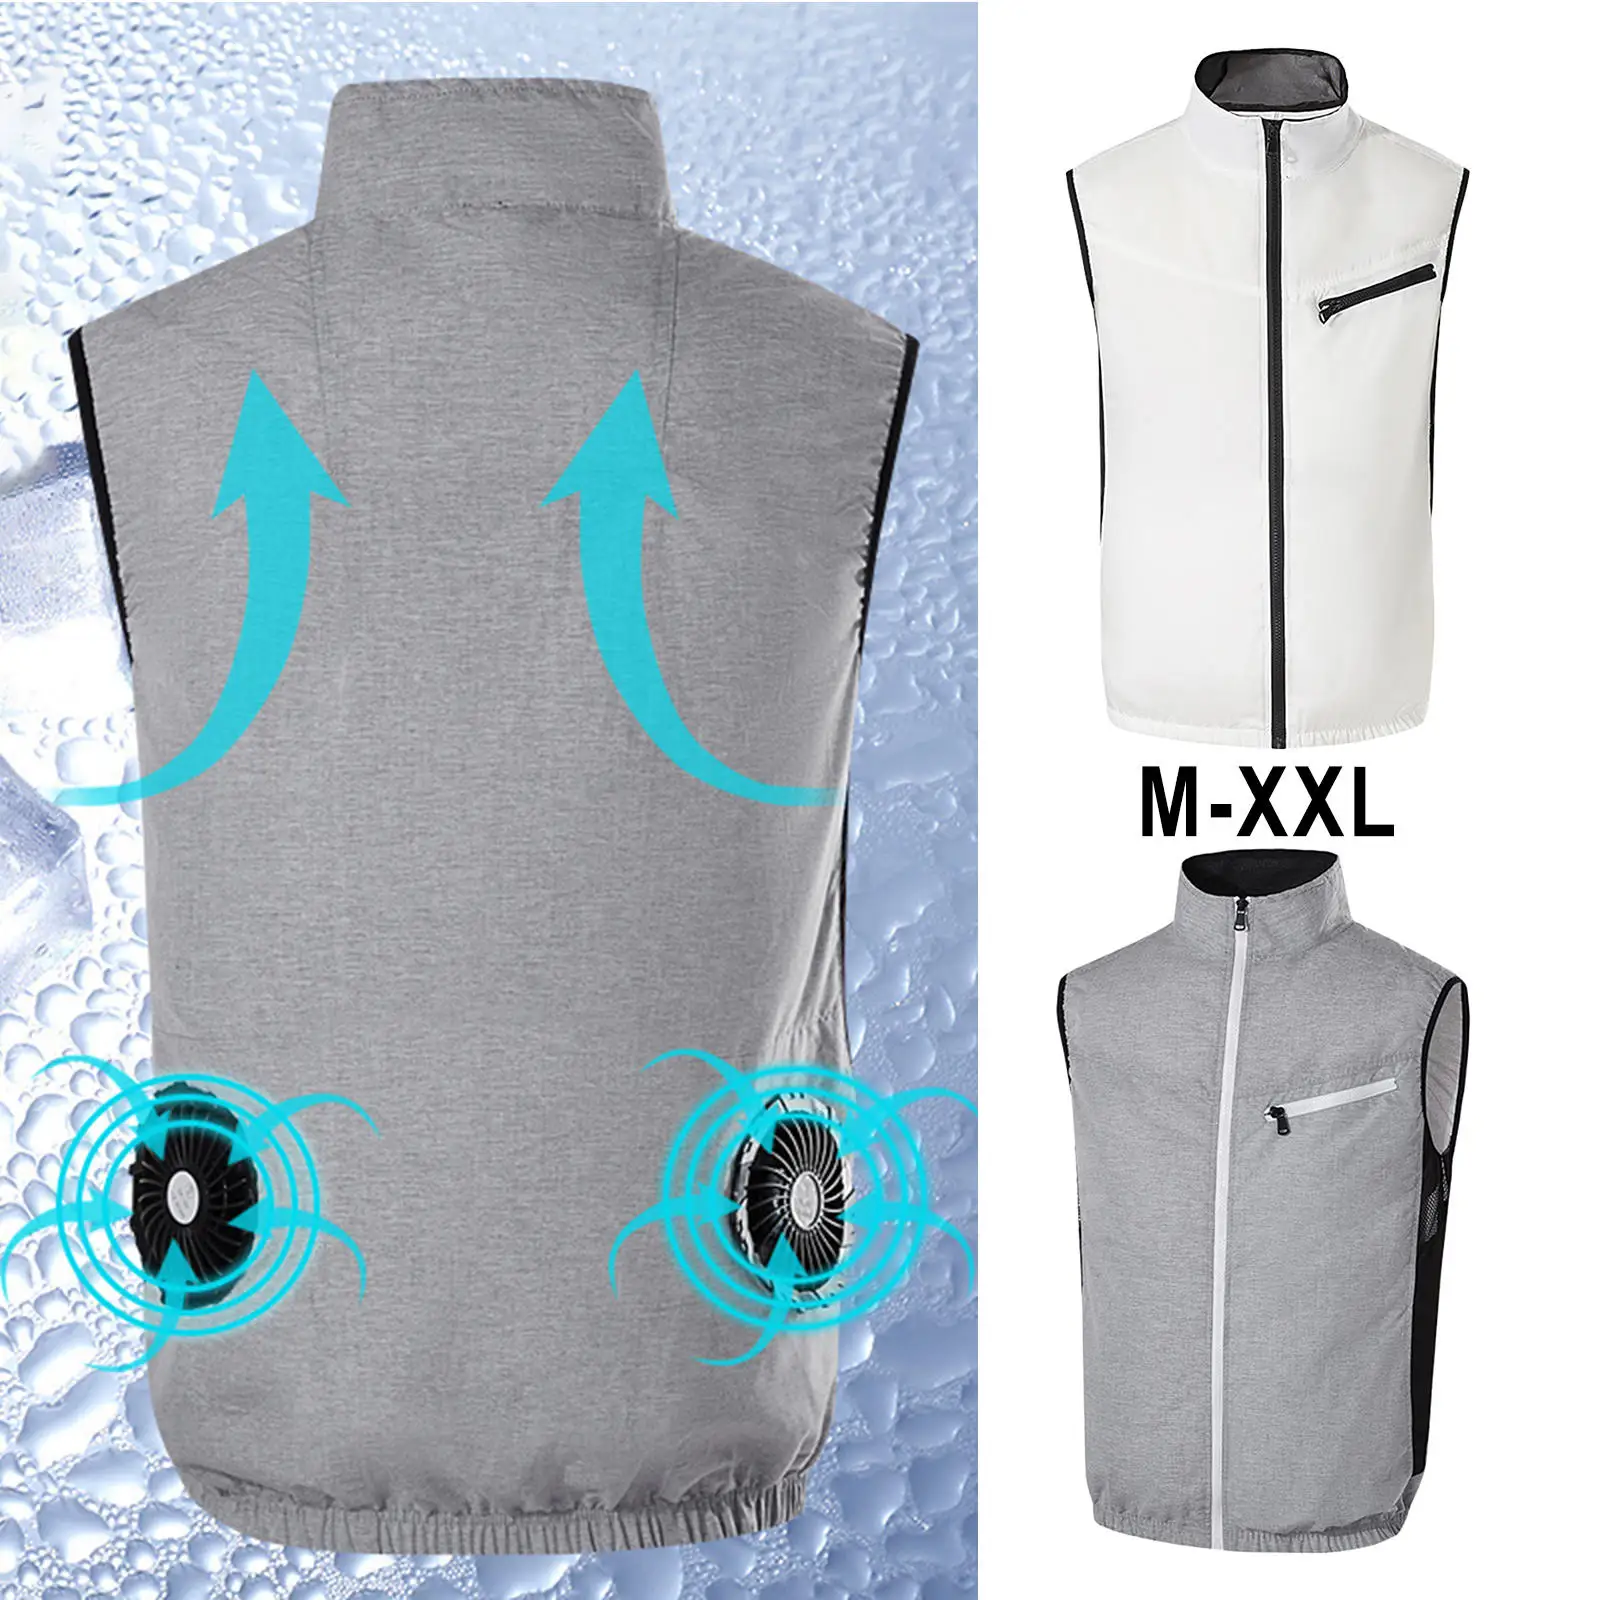 Summer Fan Cooling Vest Men Women Air Conditioning Clothes Cool Coat Outdoor Sun Protection Jacket USB 2 Fan Waistcoat